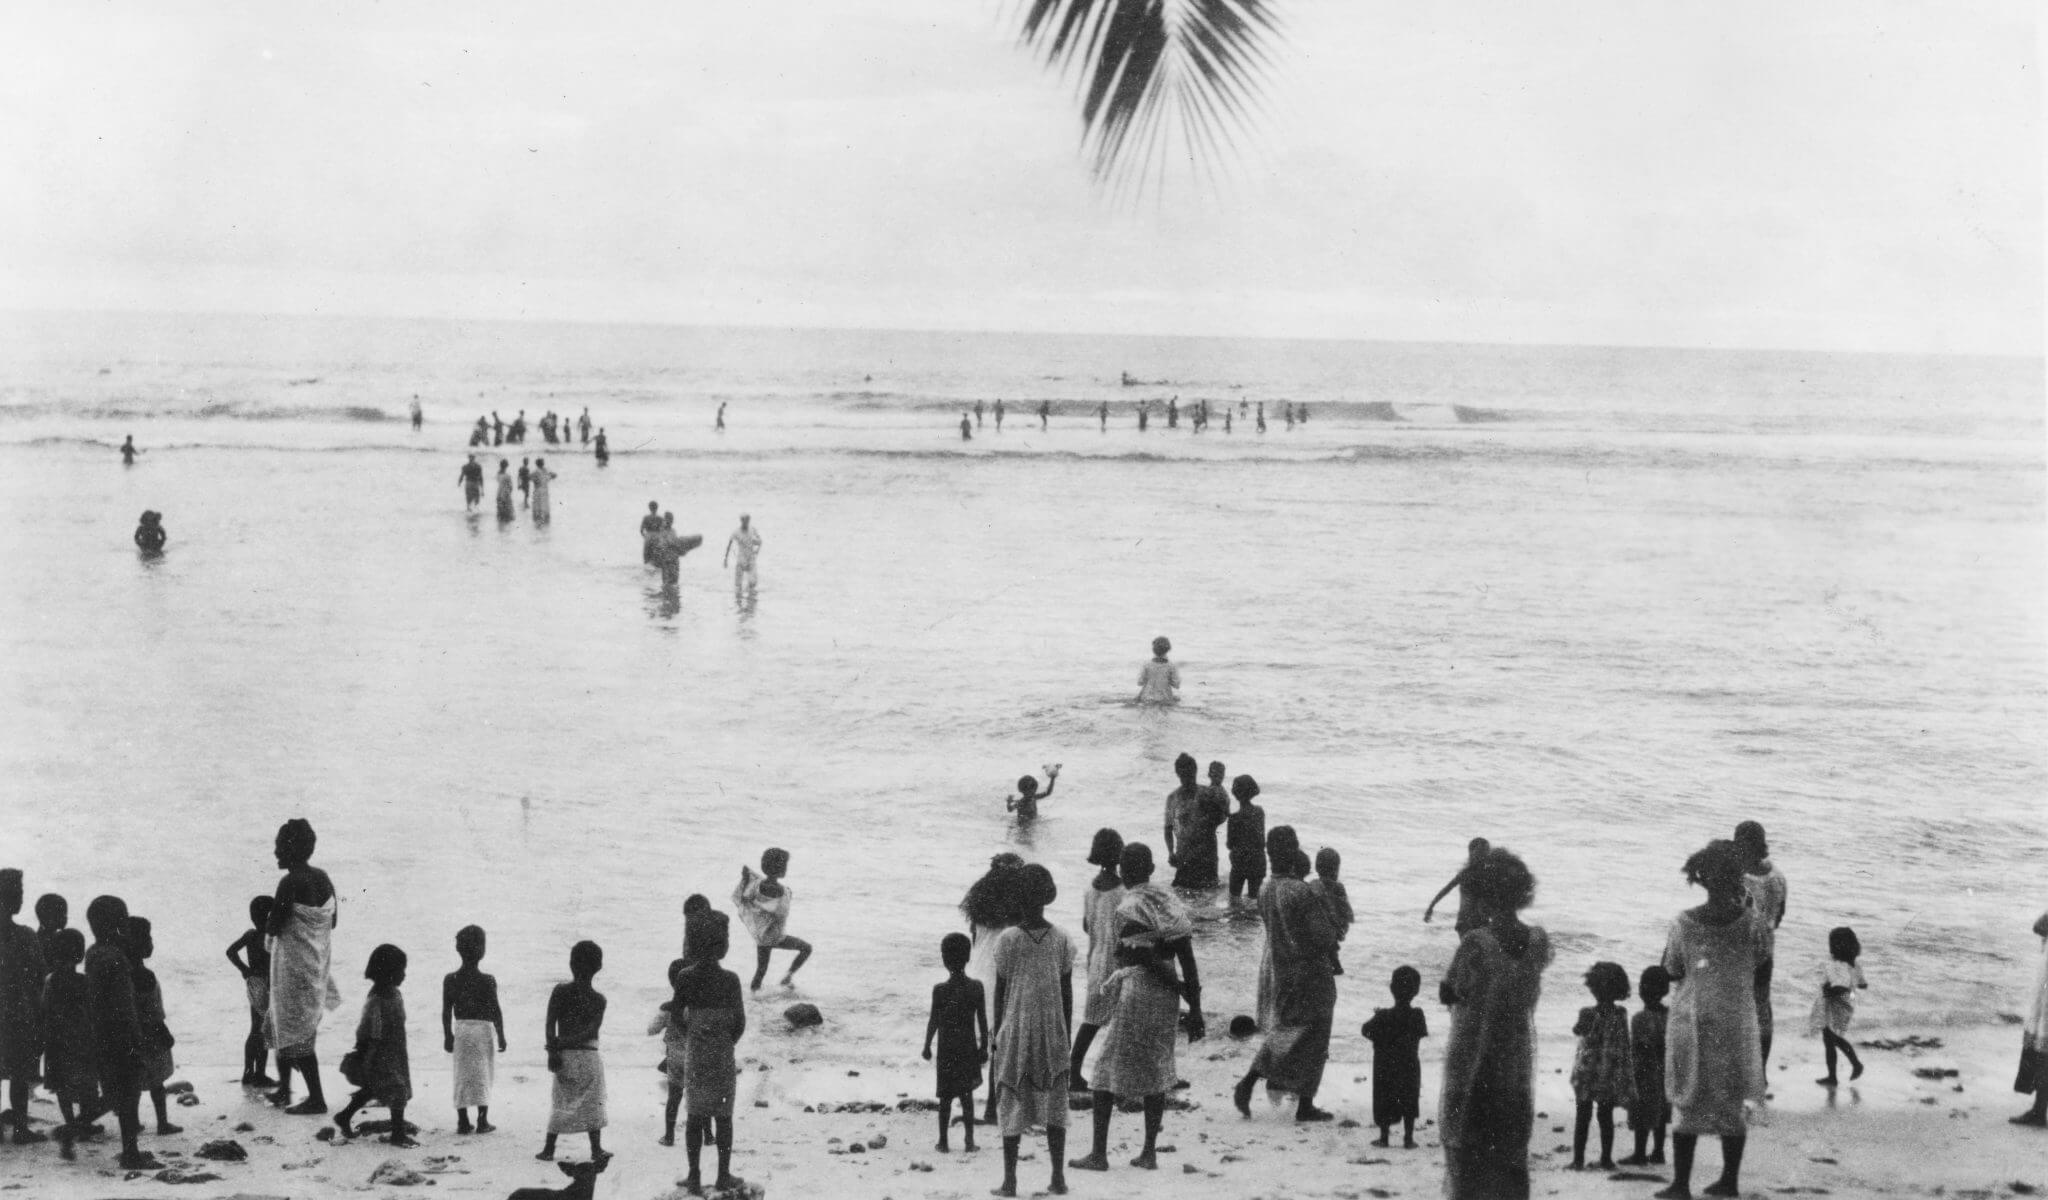 Native peoples on the beach